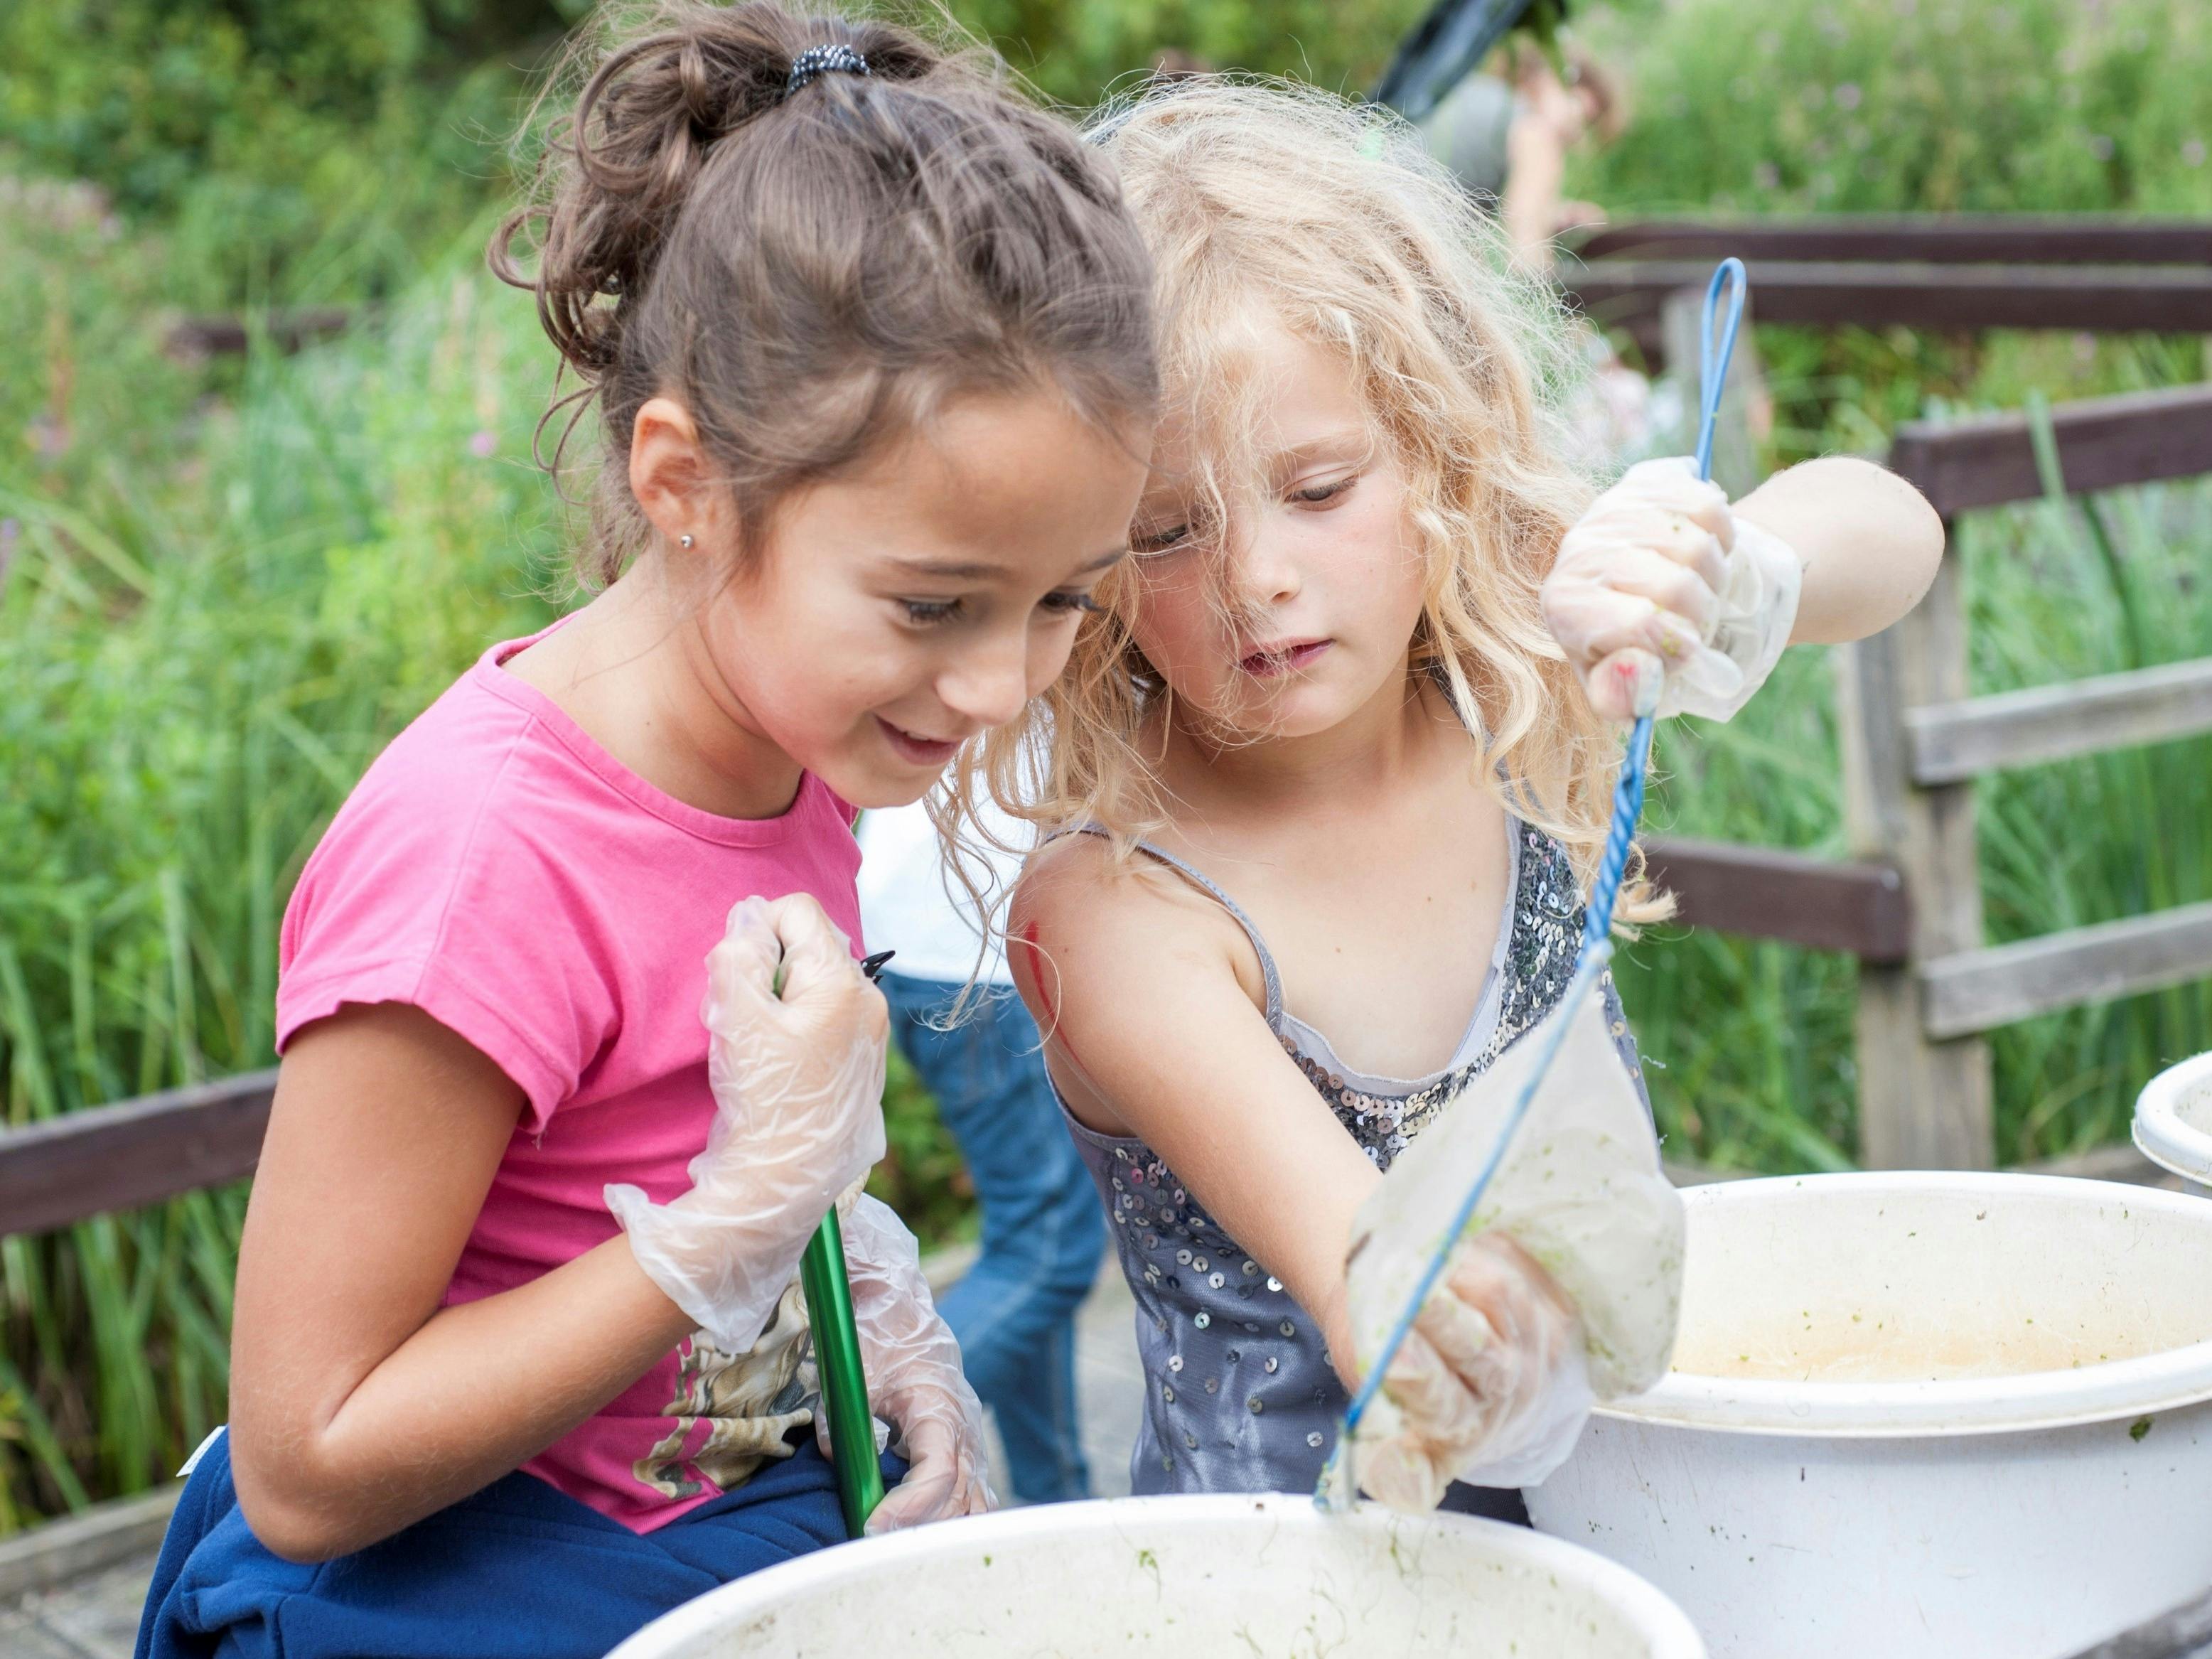 Photograph of two children with nets and buckets pond dipping